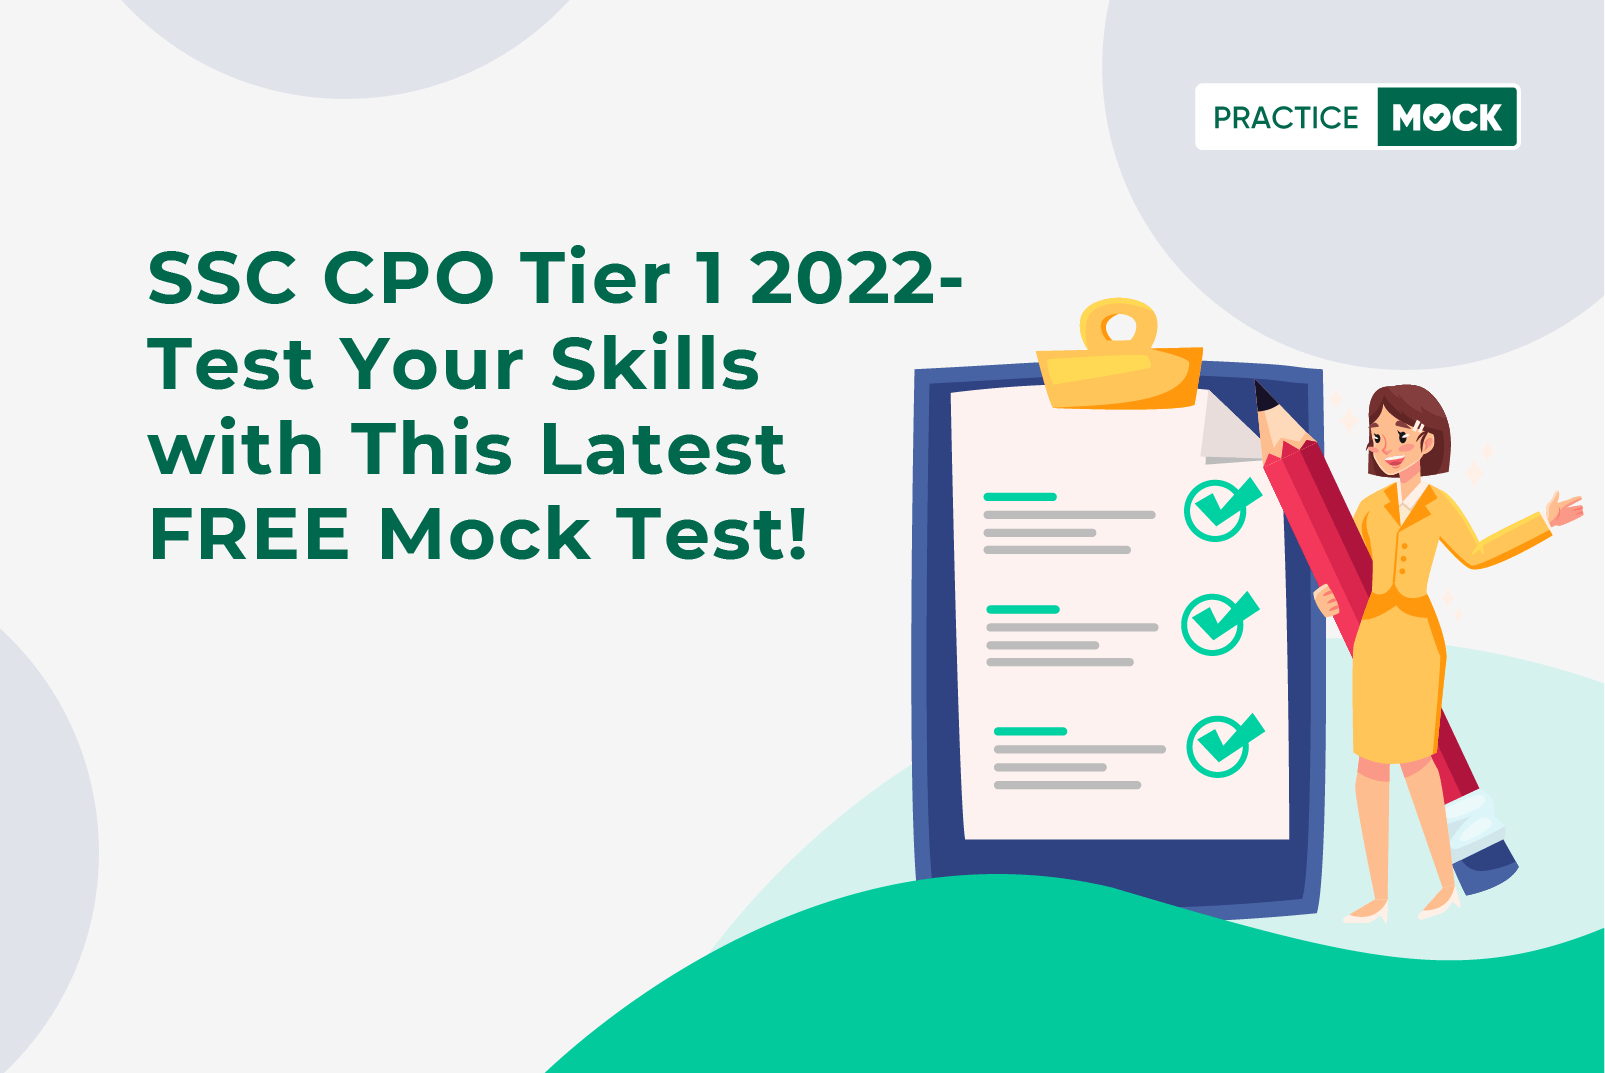 SSC CPO Tier 1 2022 Mock Tests for Success